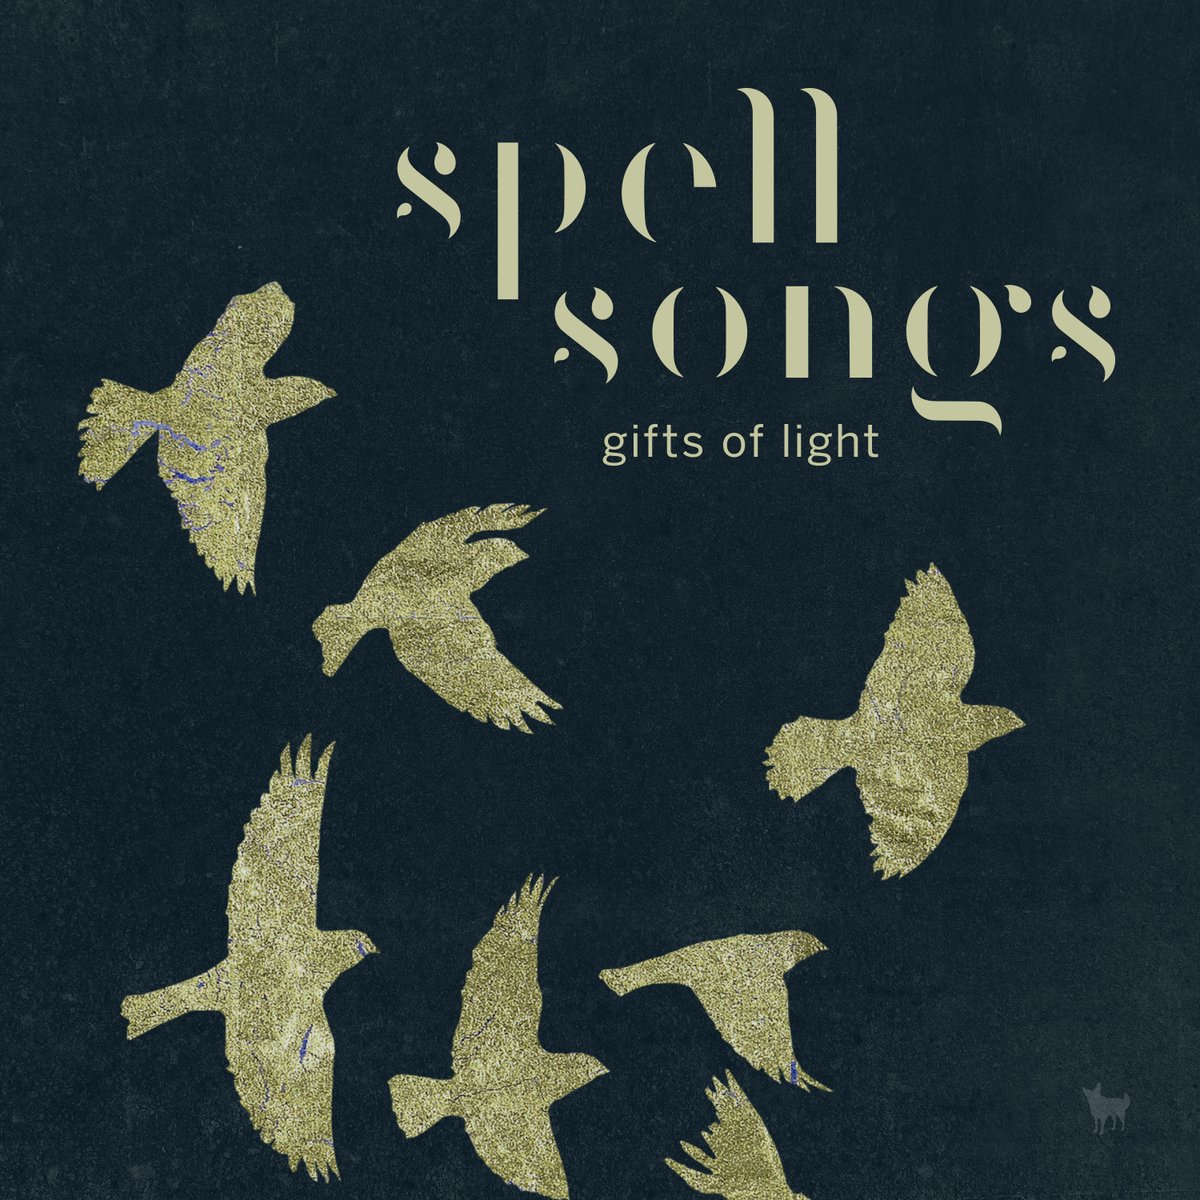 ✨‘Spell Songs, Gifts of Light’ - OUT NOW!✨ Recorded live by Andy Bell of @hudson_records at @NHM_London & @BMusic_Ltd, 'Gifts of Light' is a tracklist of true highlights! 'Uplifting vitality which soothes the soul' @folkradiouk Order/Gift here: hudsonrecords.ffm.to/giftsoflight